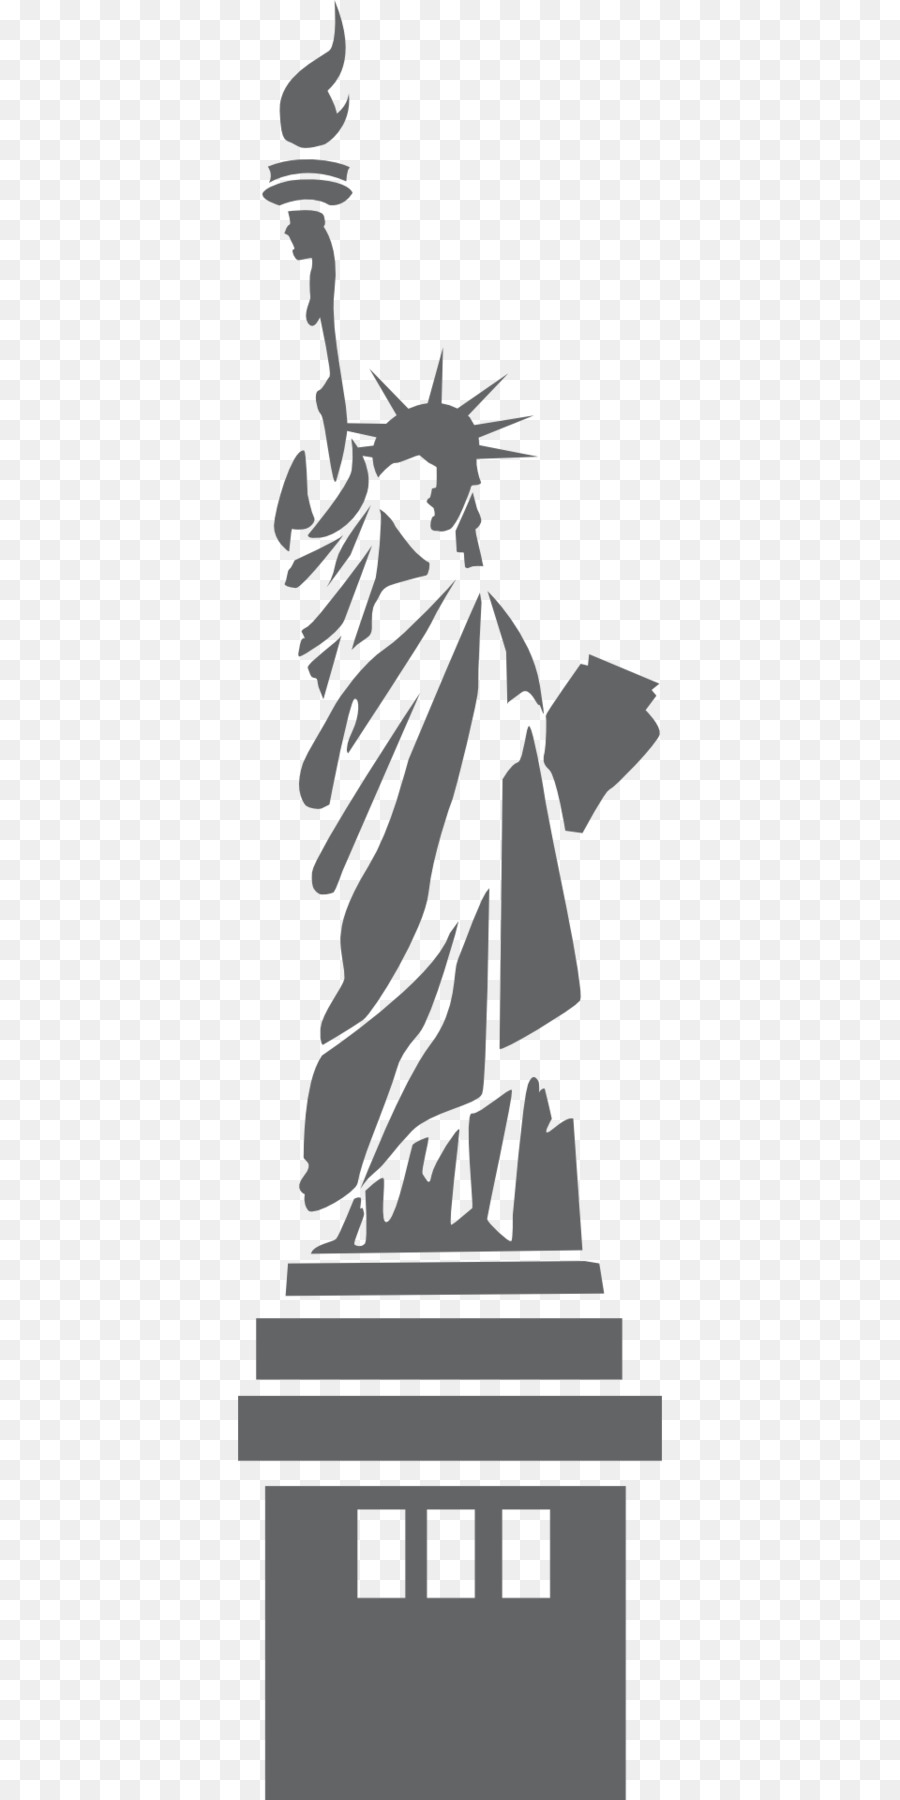 Statue of Liberty Clip art - Statue Of Liberty Silhouette png download - 960*1920 - Free Transparent Statue Of Liberty png Download.